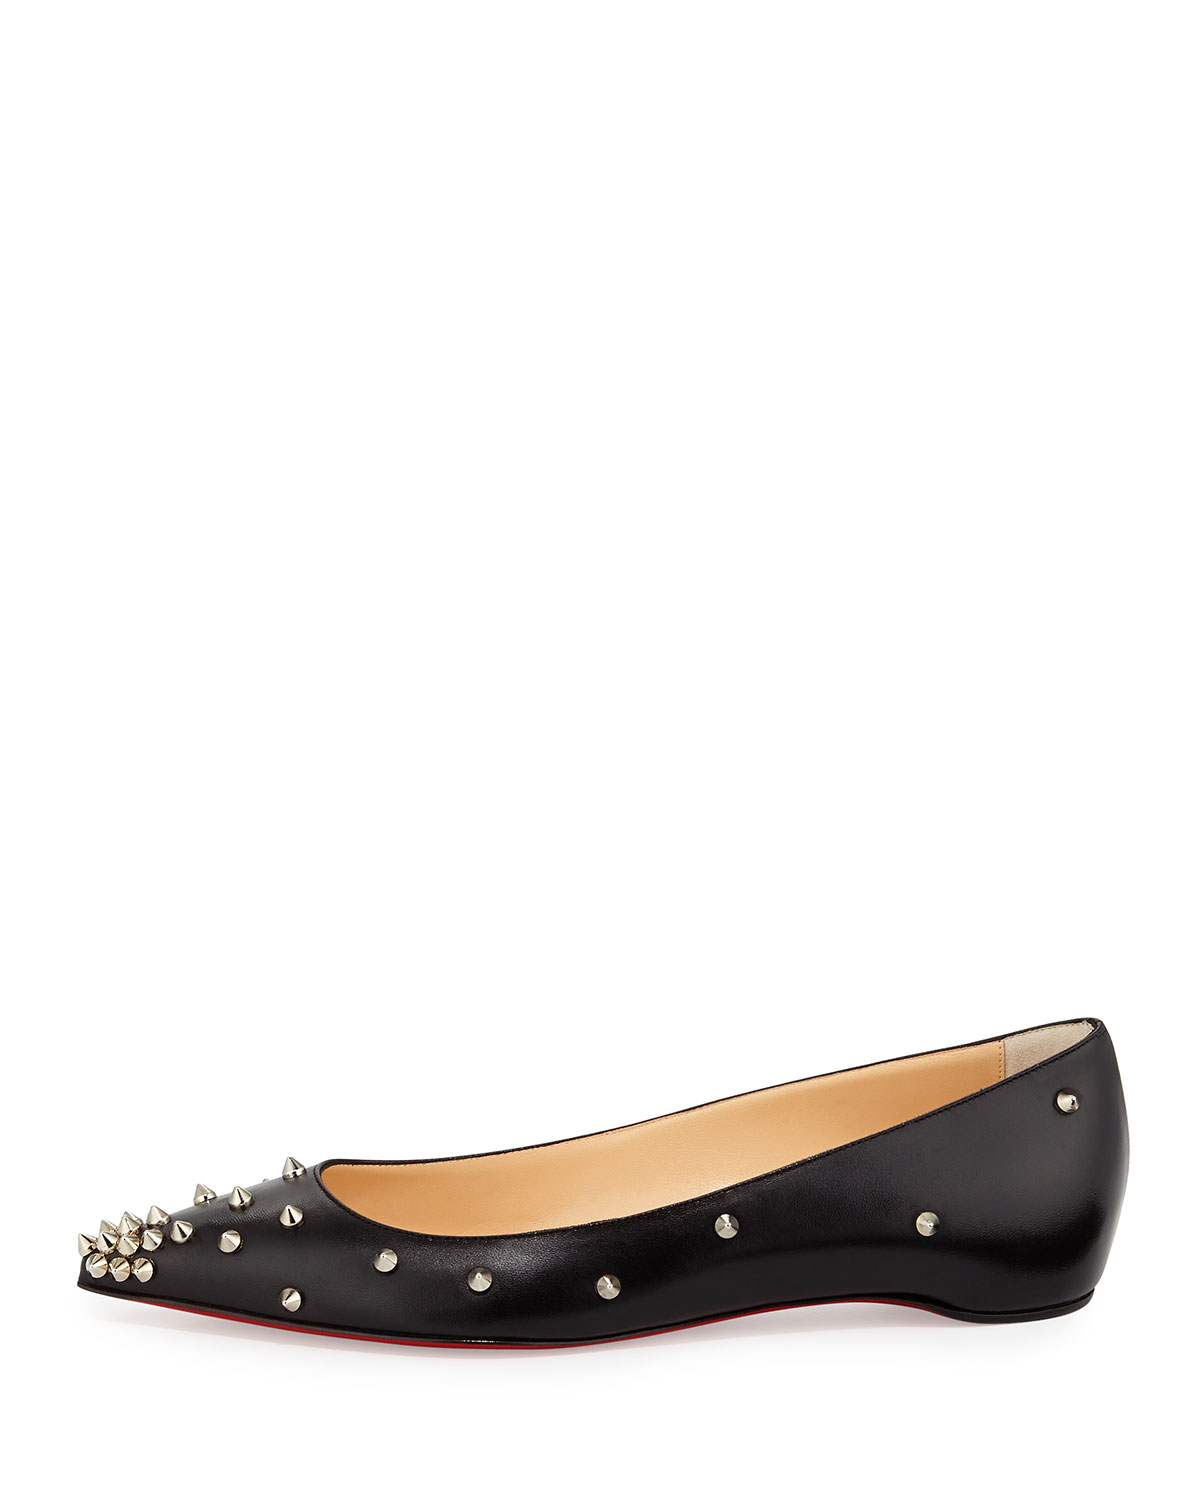 christian louboutin pointed-toe flats Black suede | The Little ...